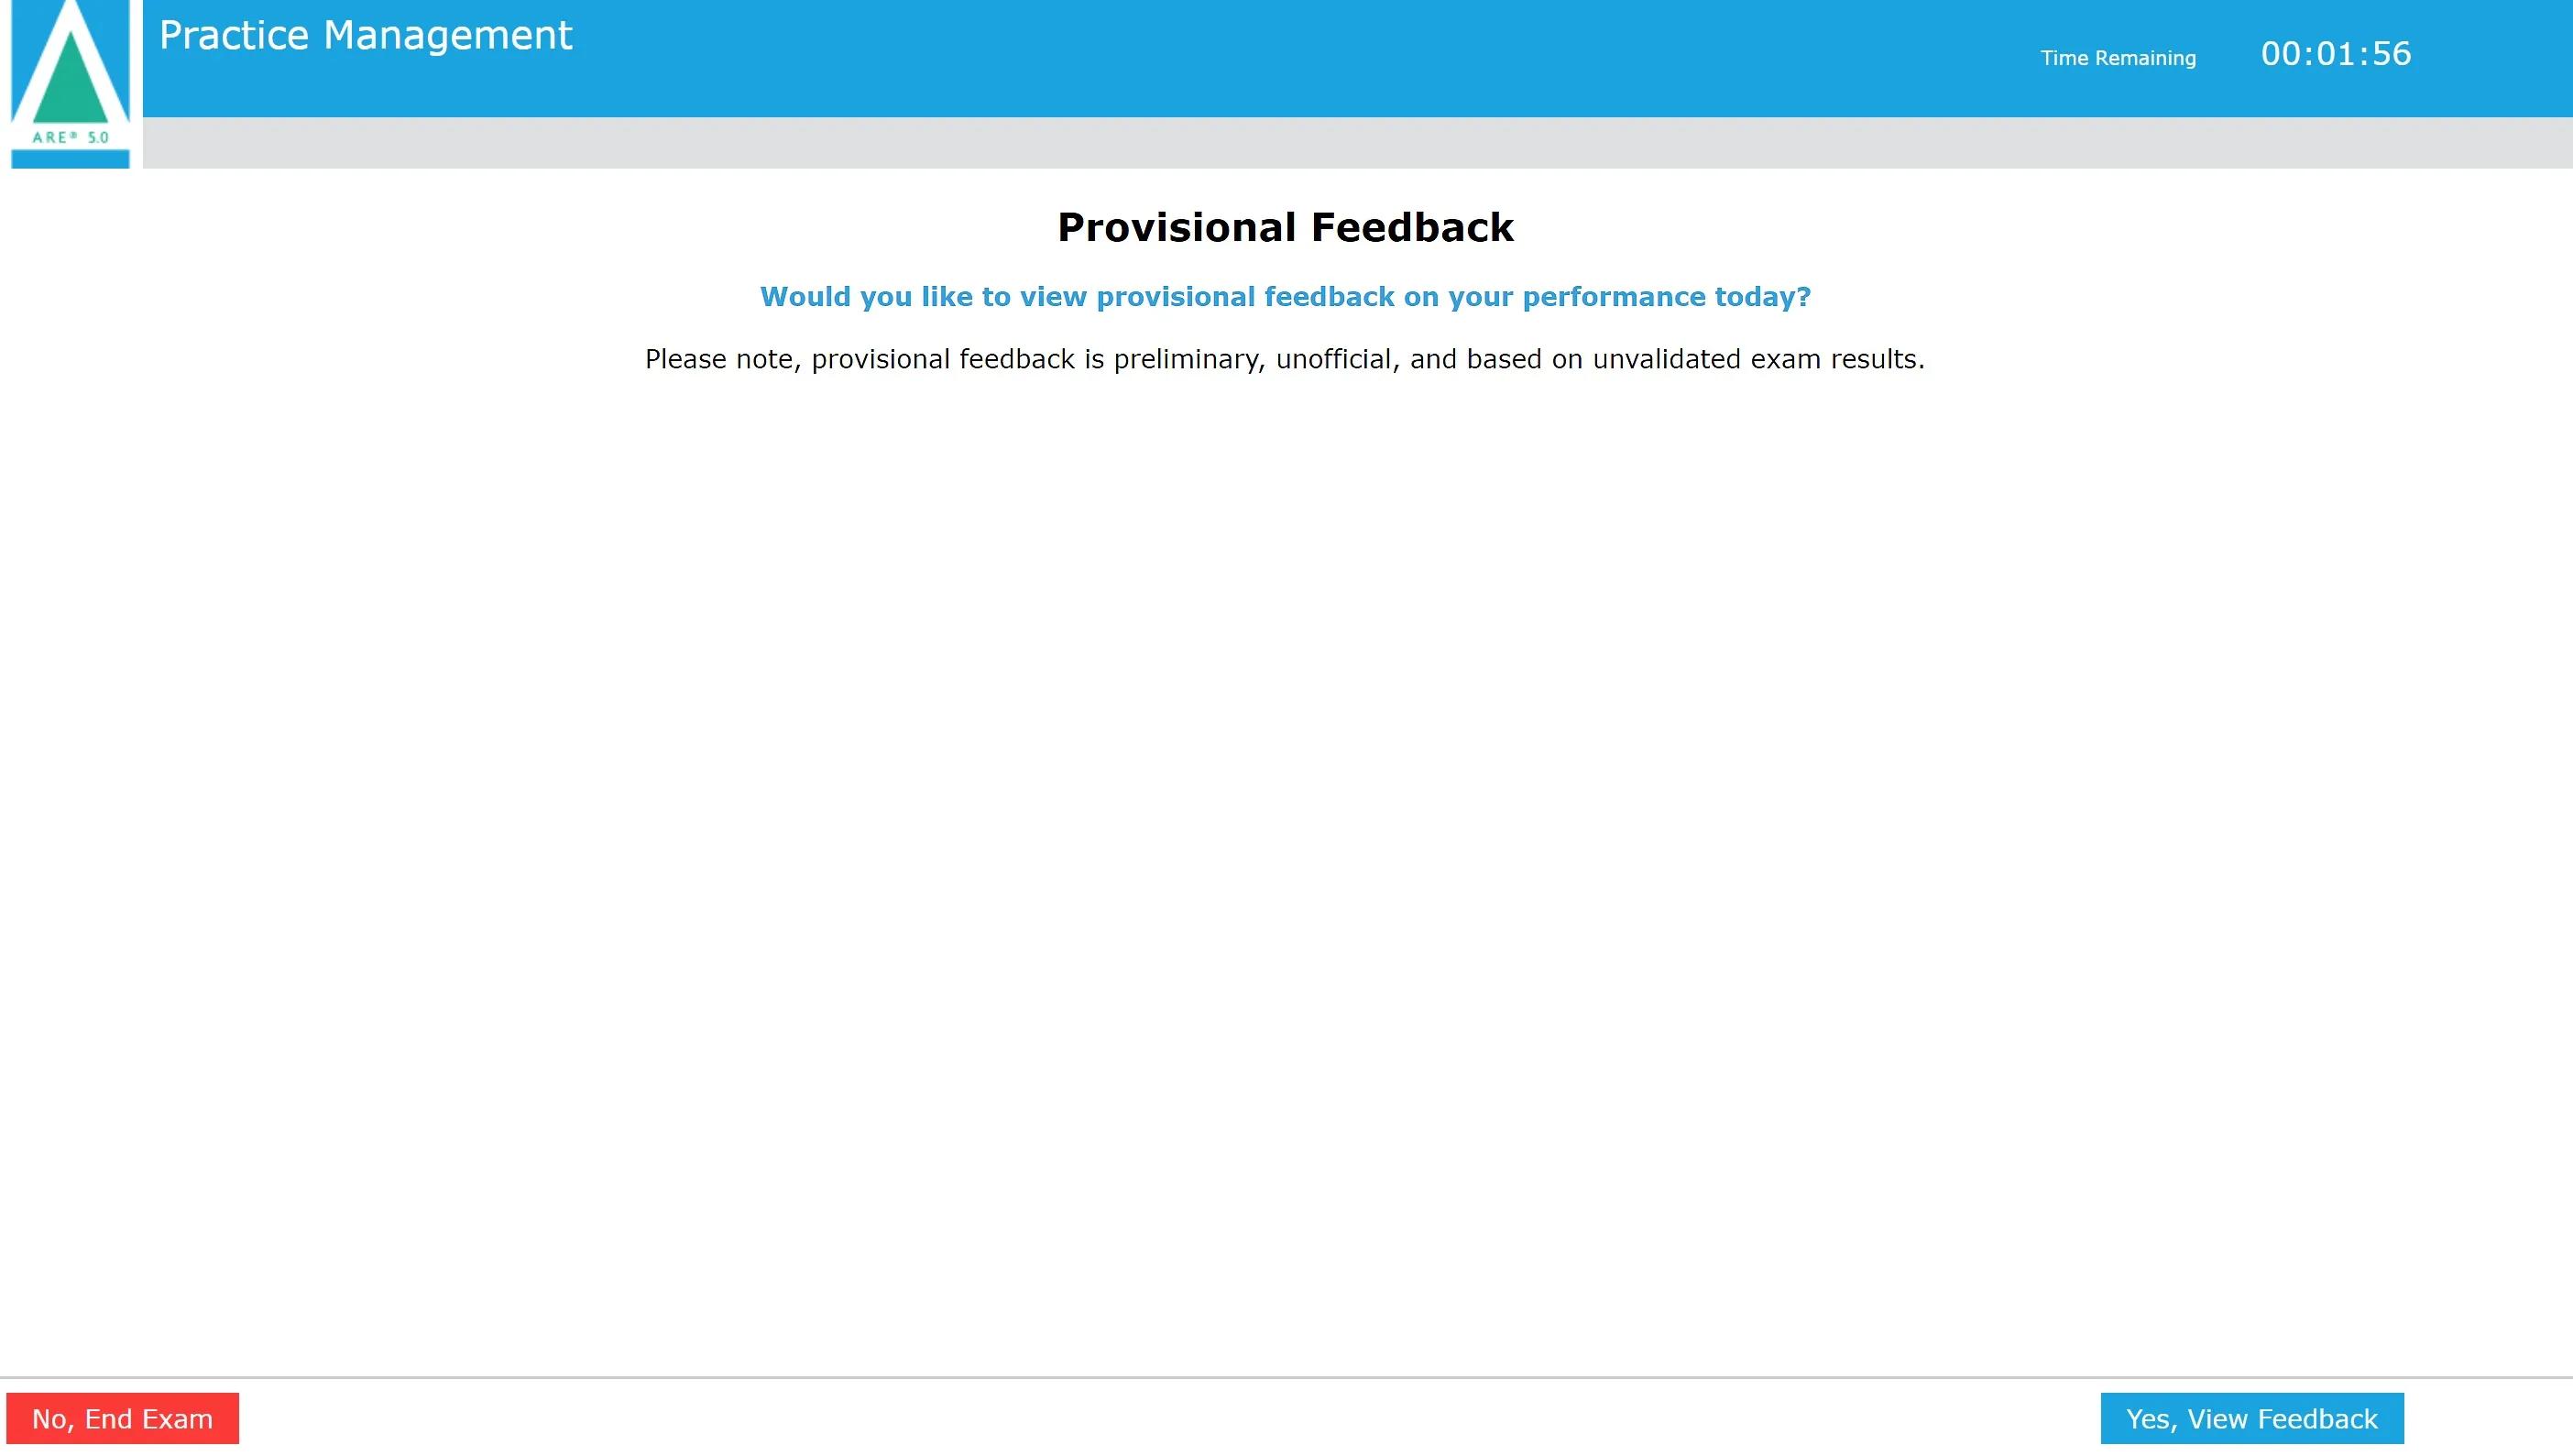 You will be asked if you would like to view provisional feedback.